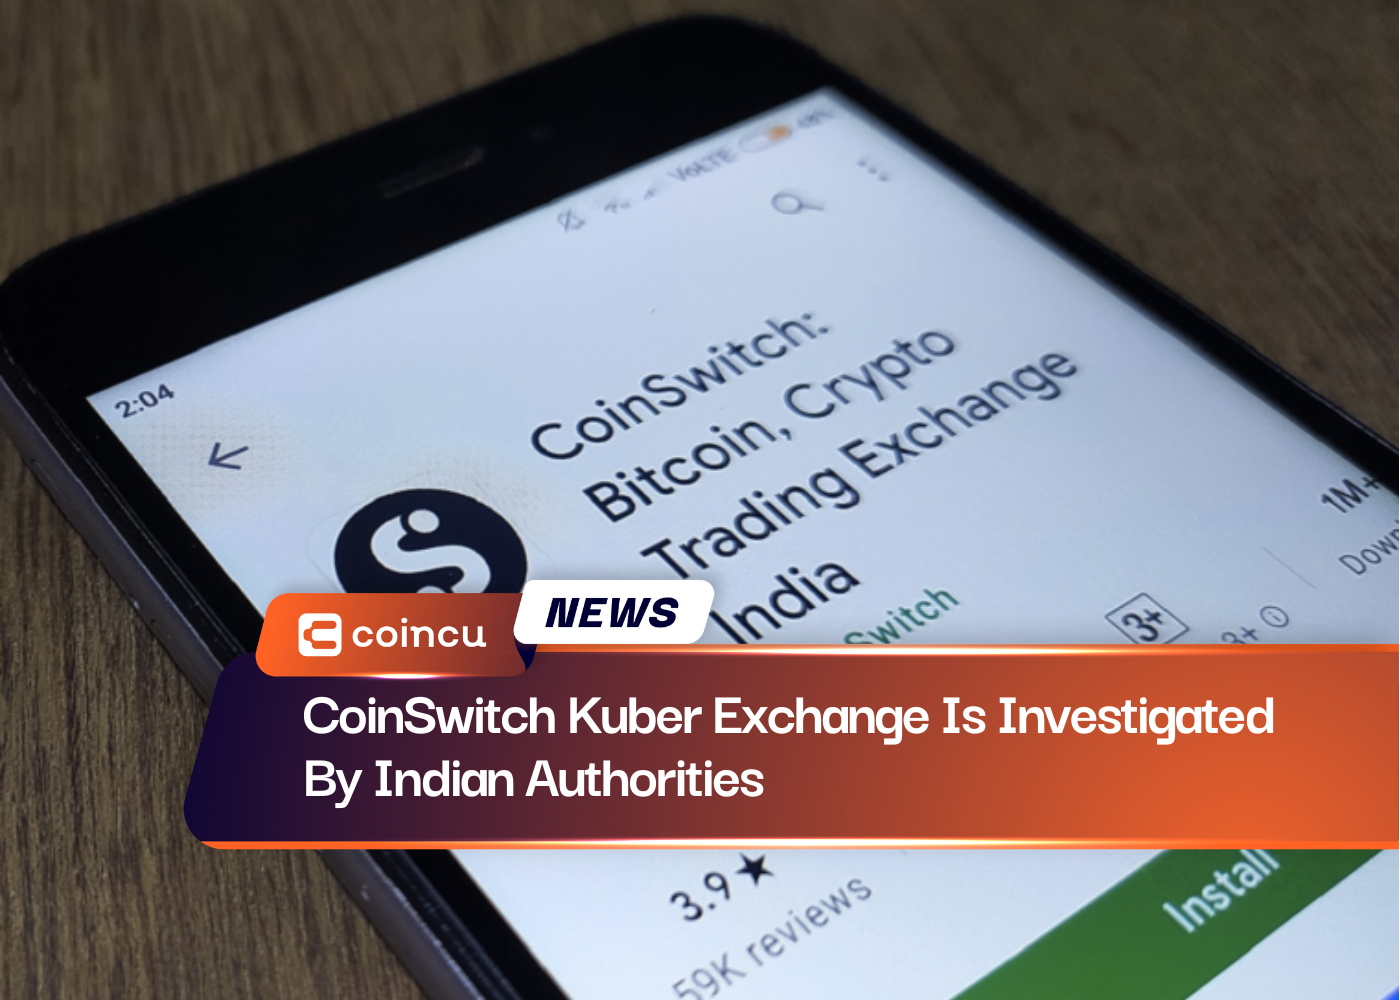 CoinSwitch Kuber Exchange Is Investigated By Indian Authorities